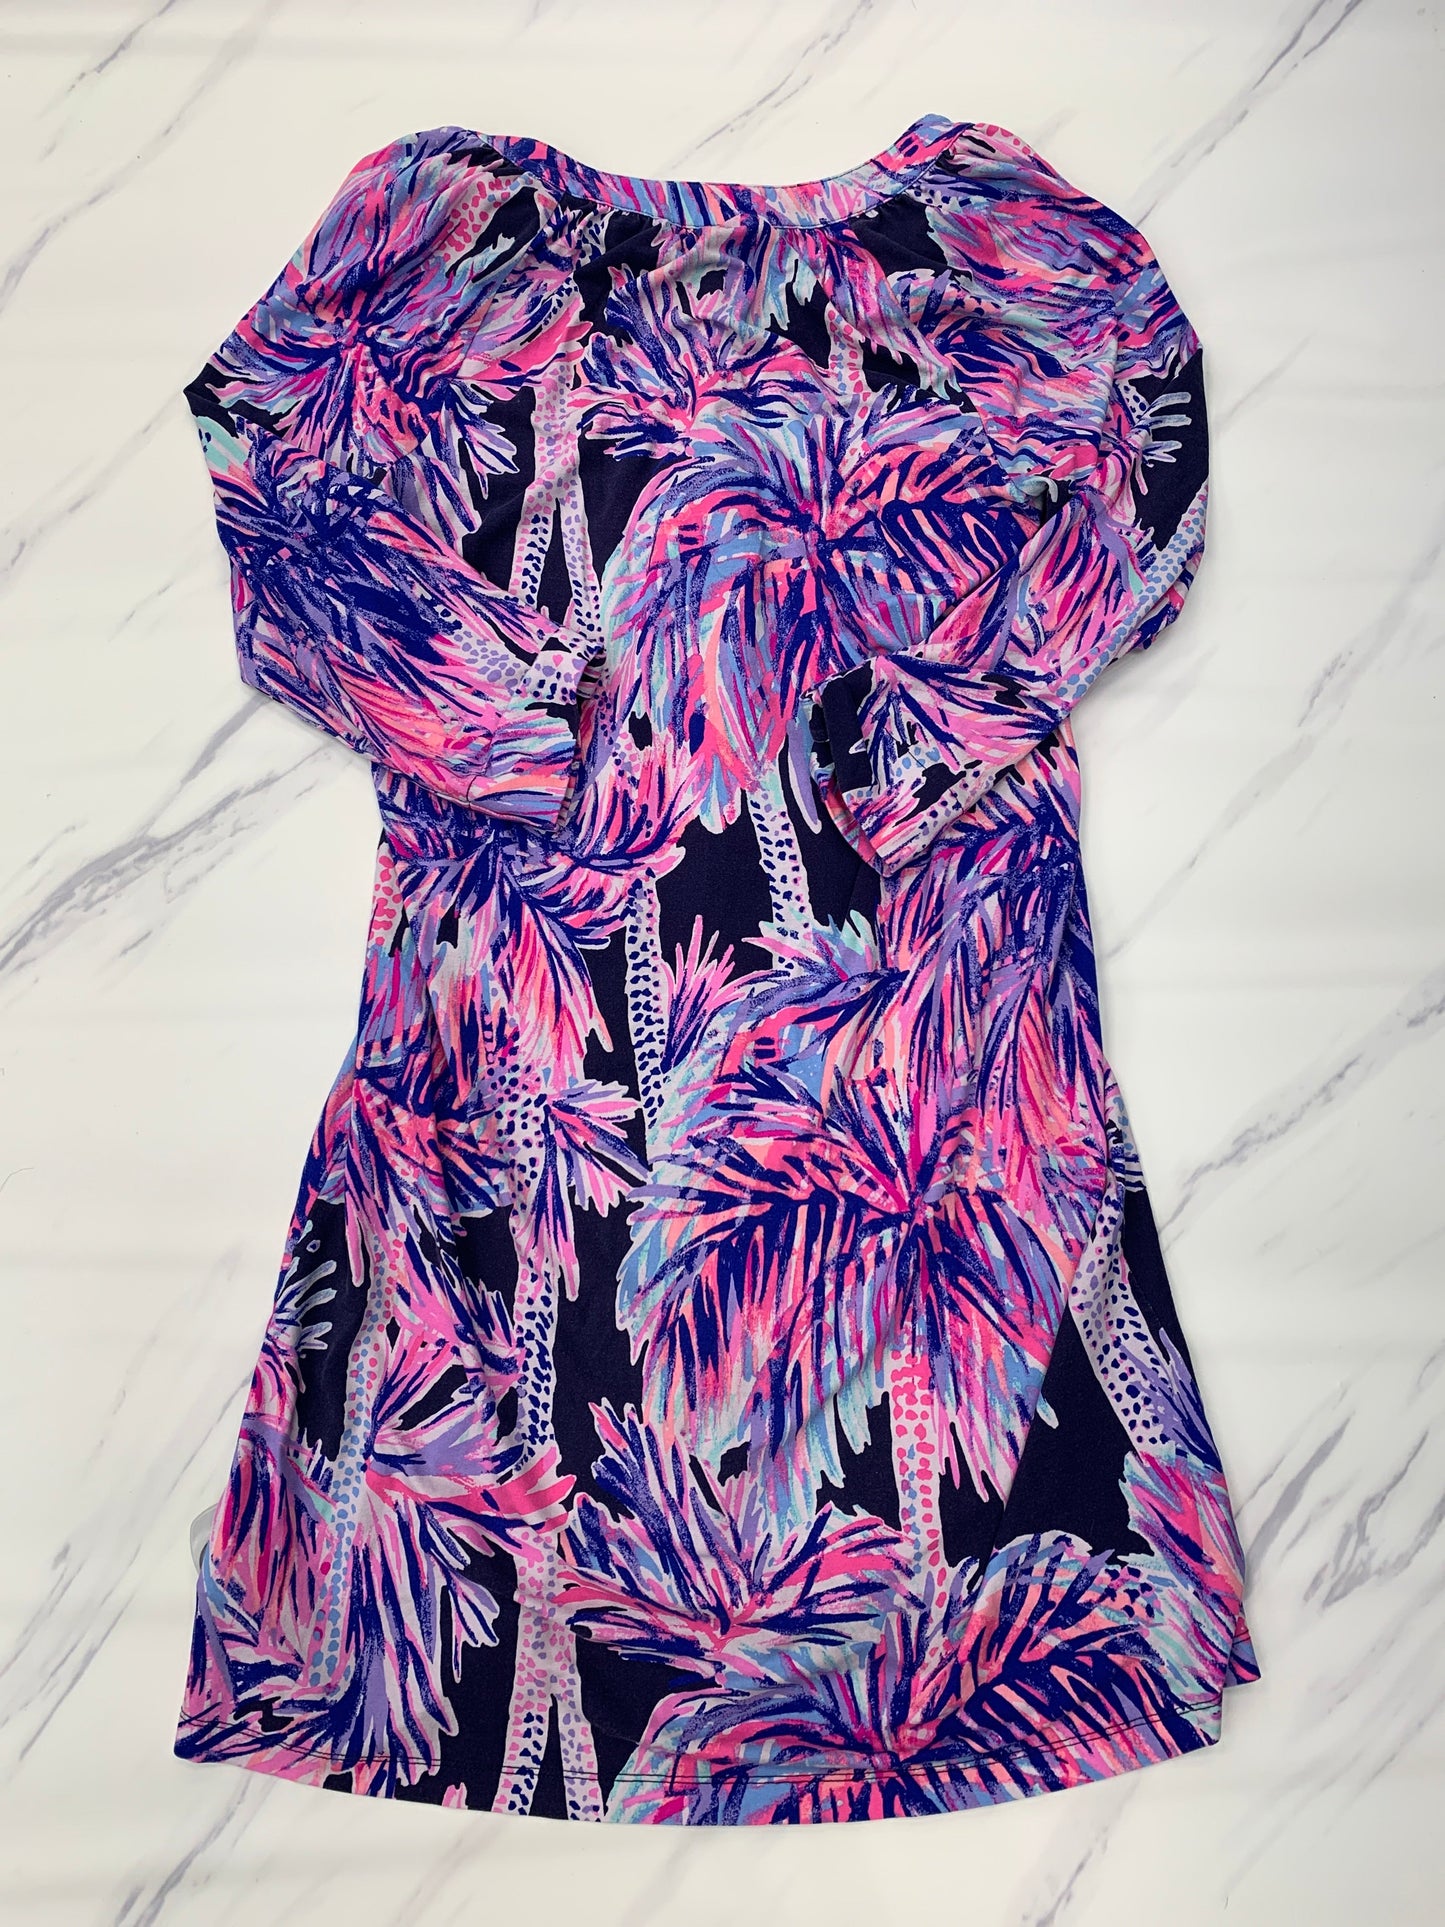 Dress Casual Midi Lilly Pulitzer, Size S